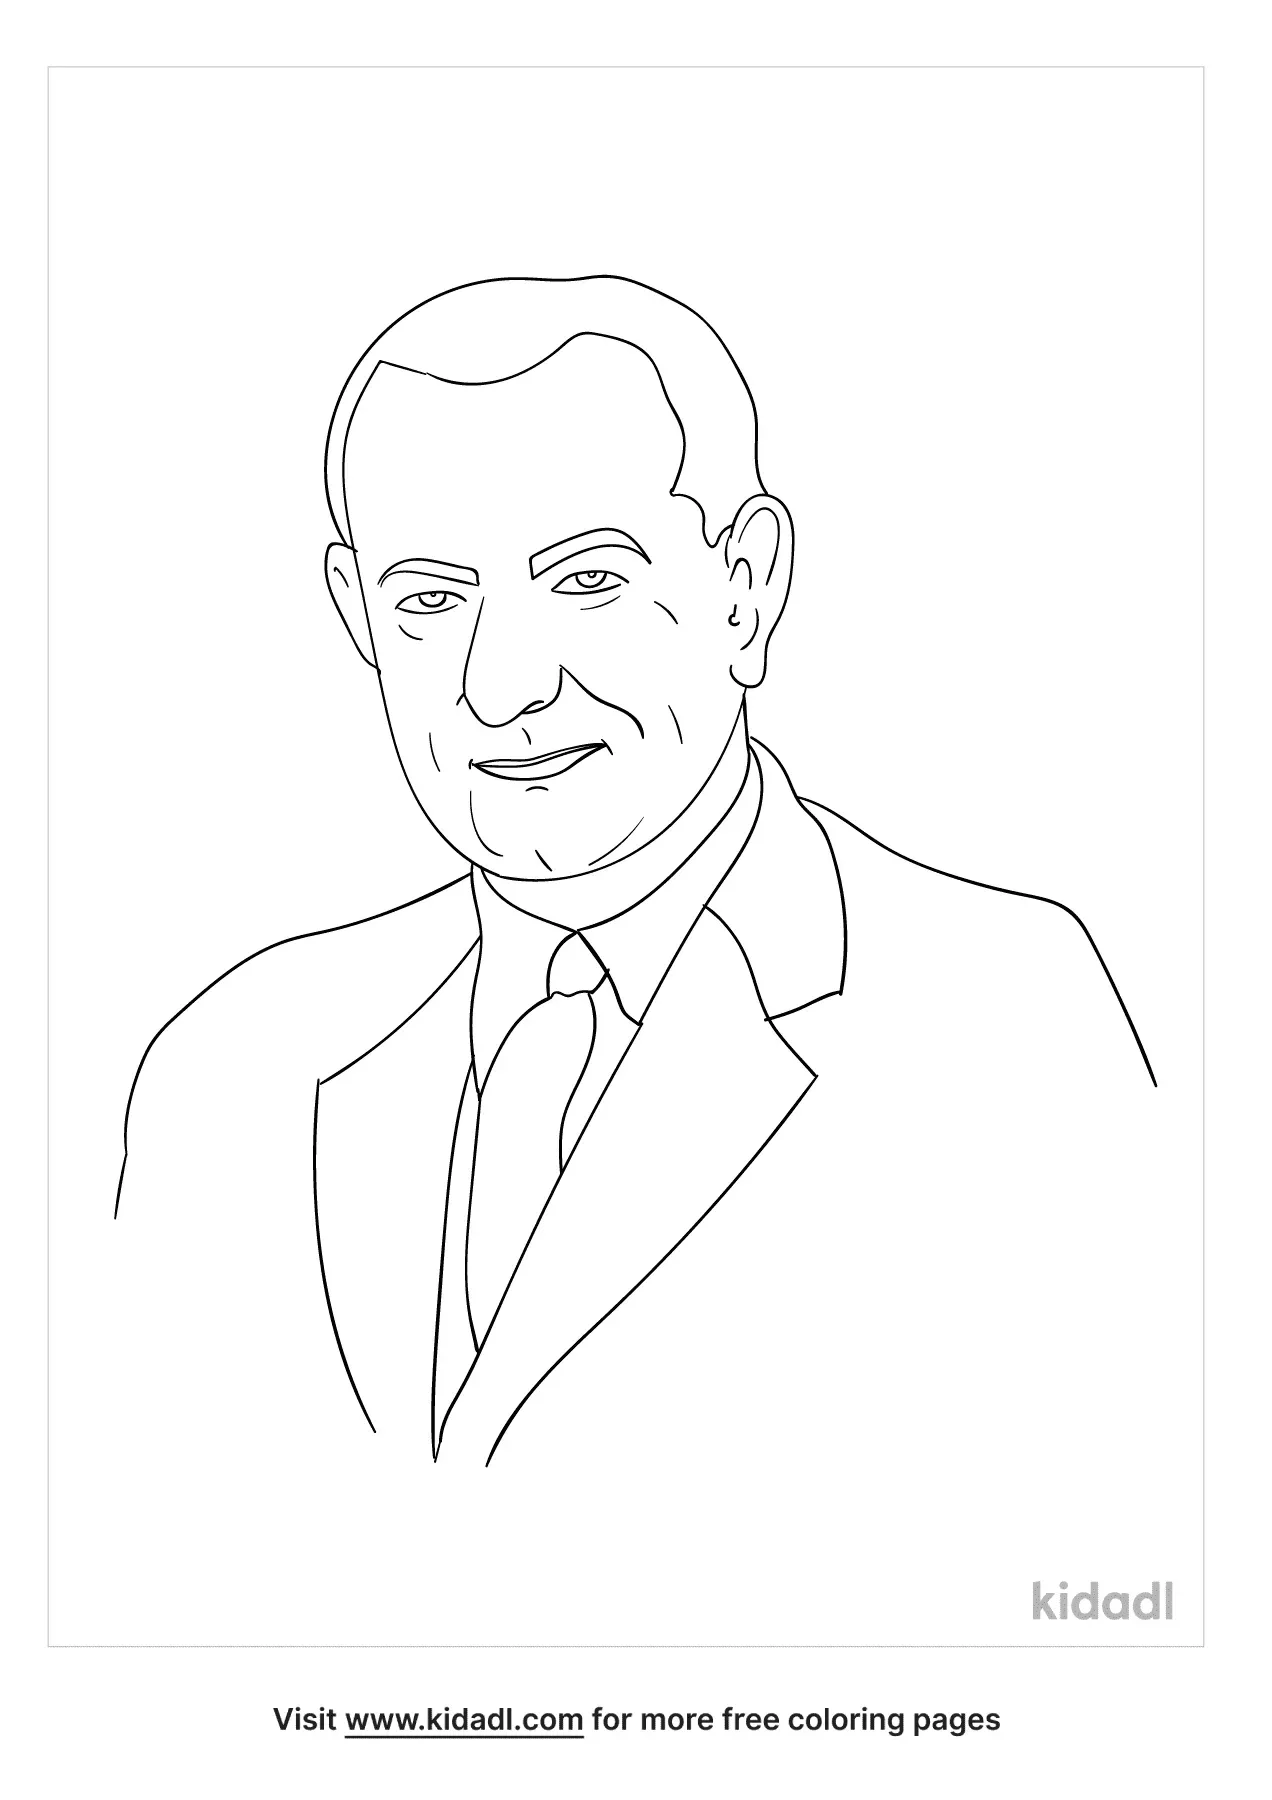 Hatti Mcdaniel Pdf Coloring Page | Free Famous Coloring Page | Kidadl